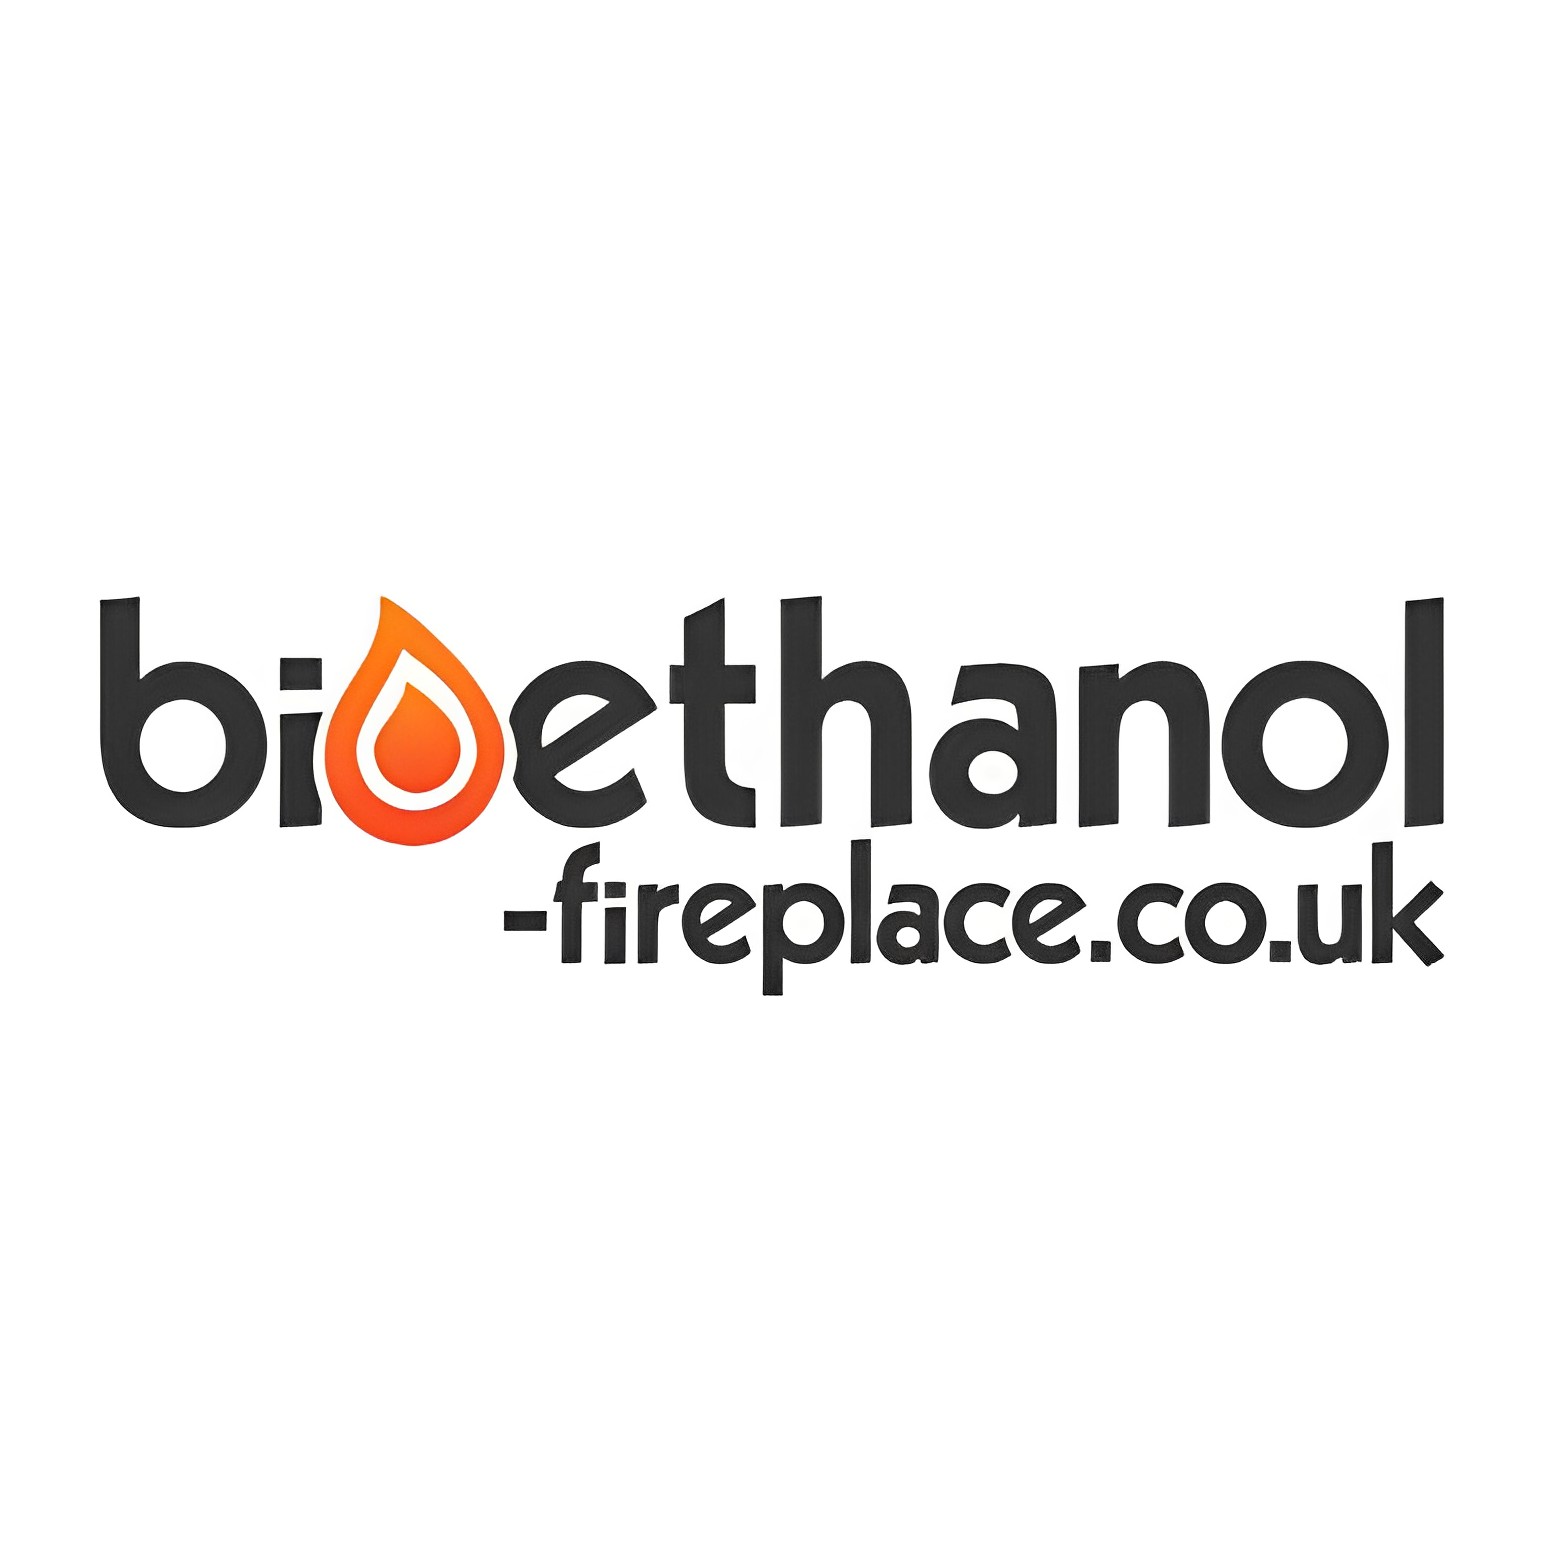 Bioethanol Fireplace  Discount Codes, Promo Codes & Deals for May 2021